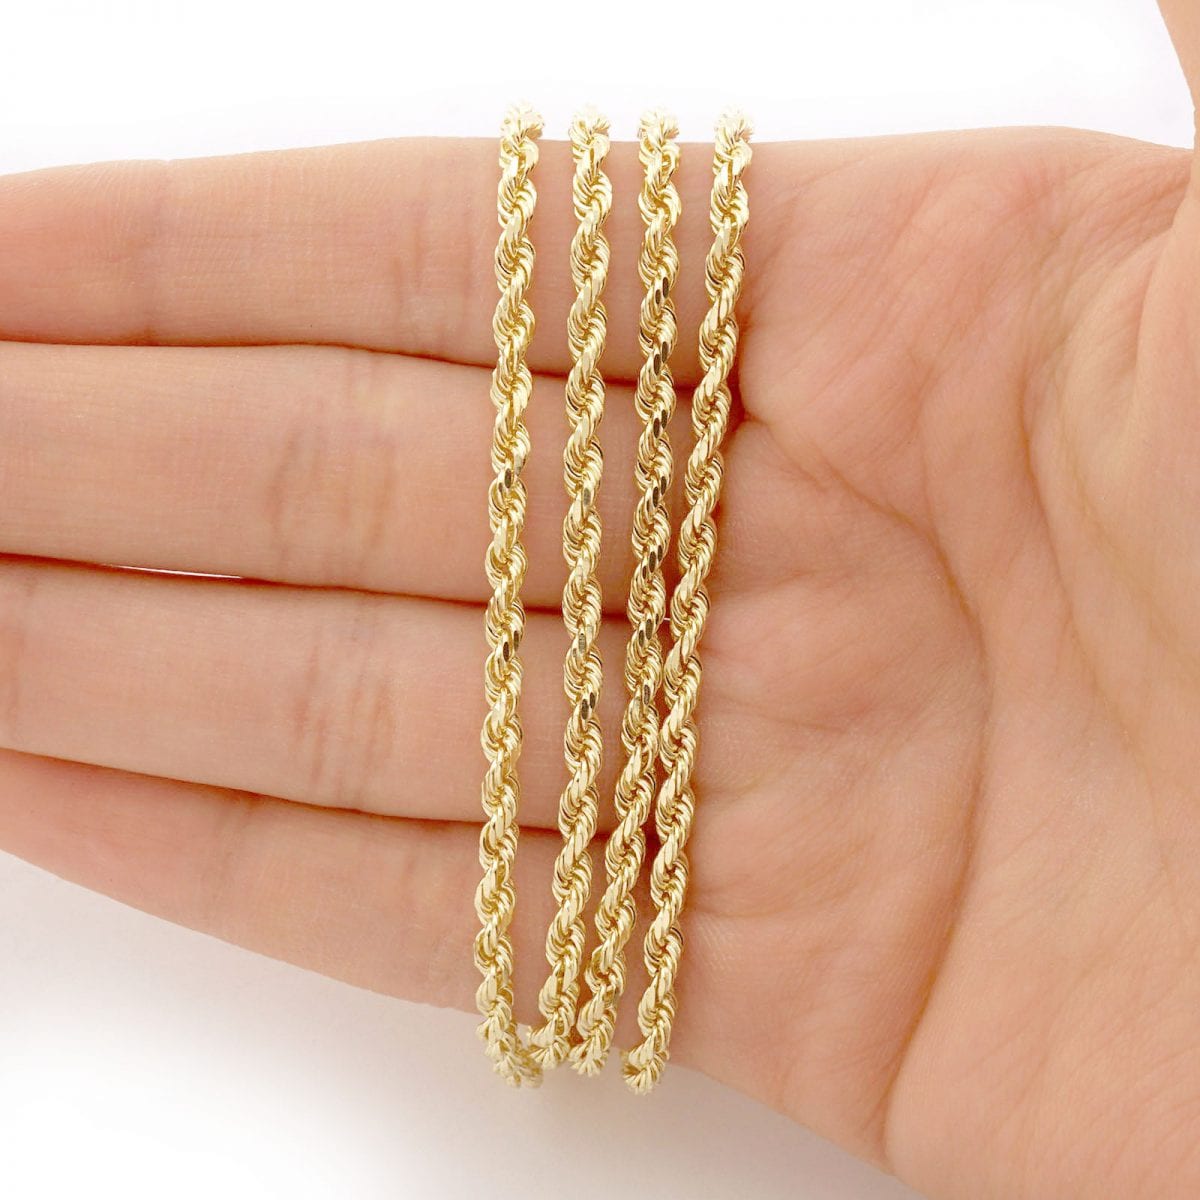 Solid 14k Yellow Gold 2mm-7mm Diamond Cut Rope Chain Necklace 20